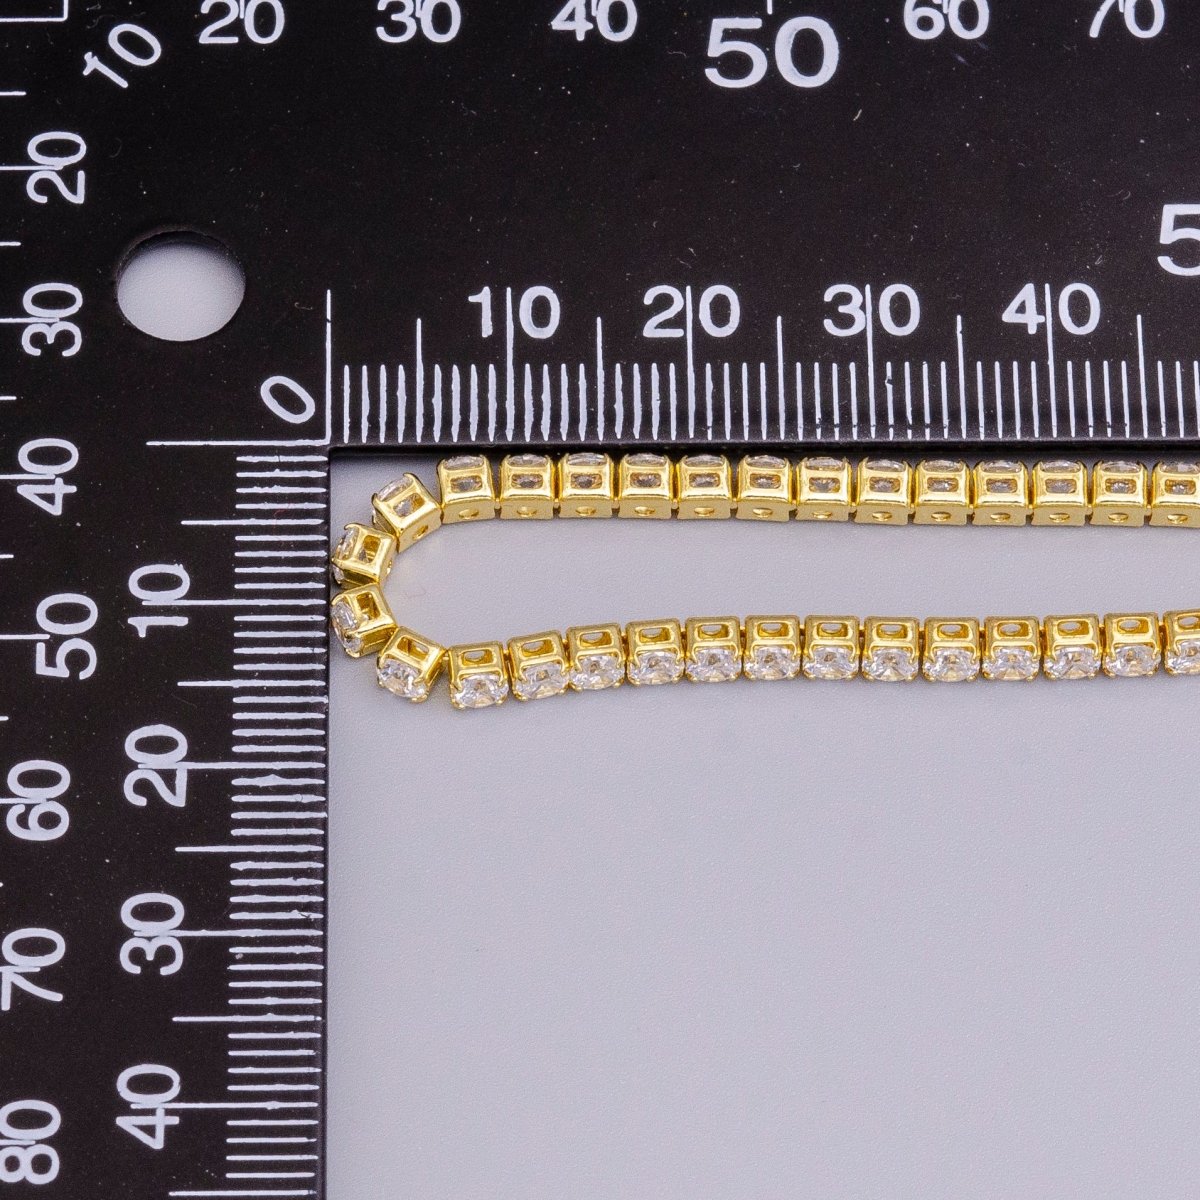 16K Gold Filled 3mm Clear Crystal Tennis Chain 5.75", 6.25", 7.25" Bracelet | WA-1884 - WA-1886 Clearance Pricing - DLUXCA